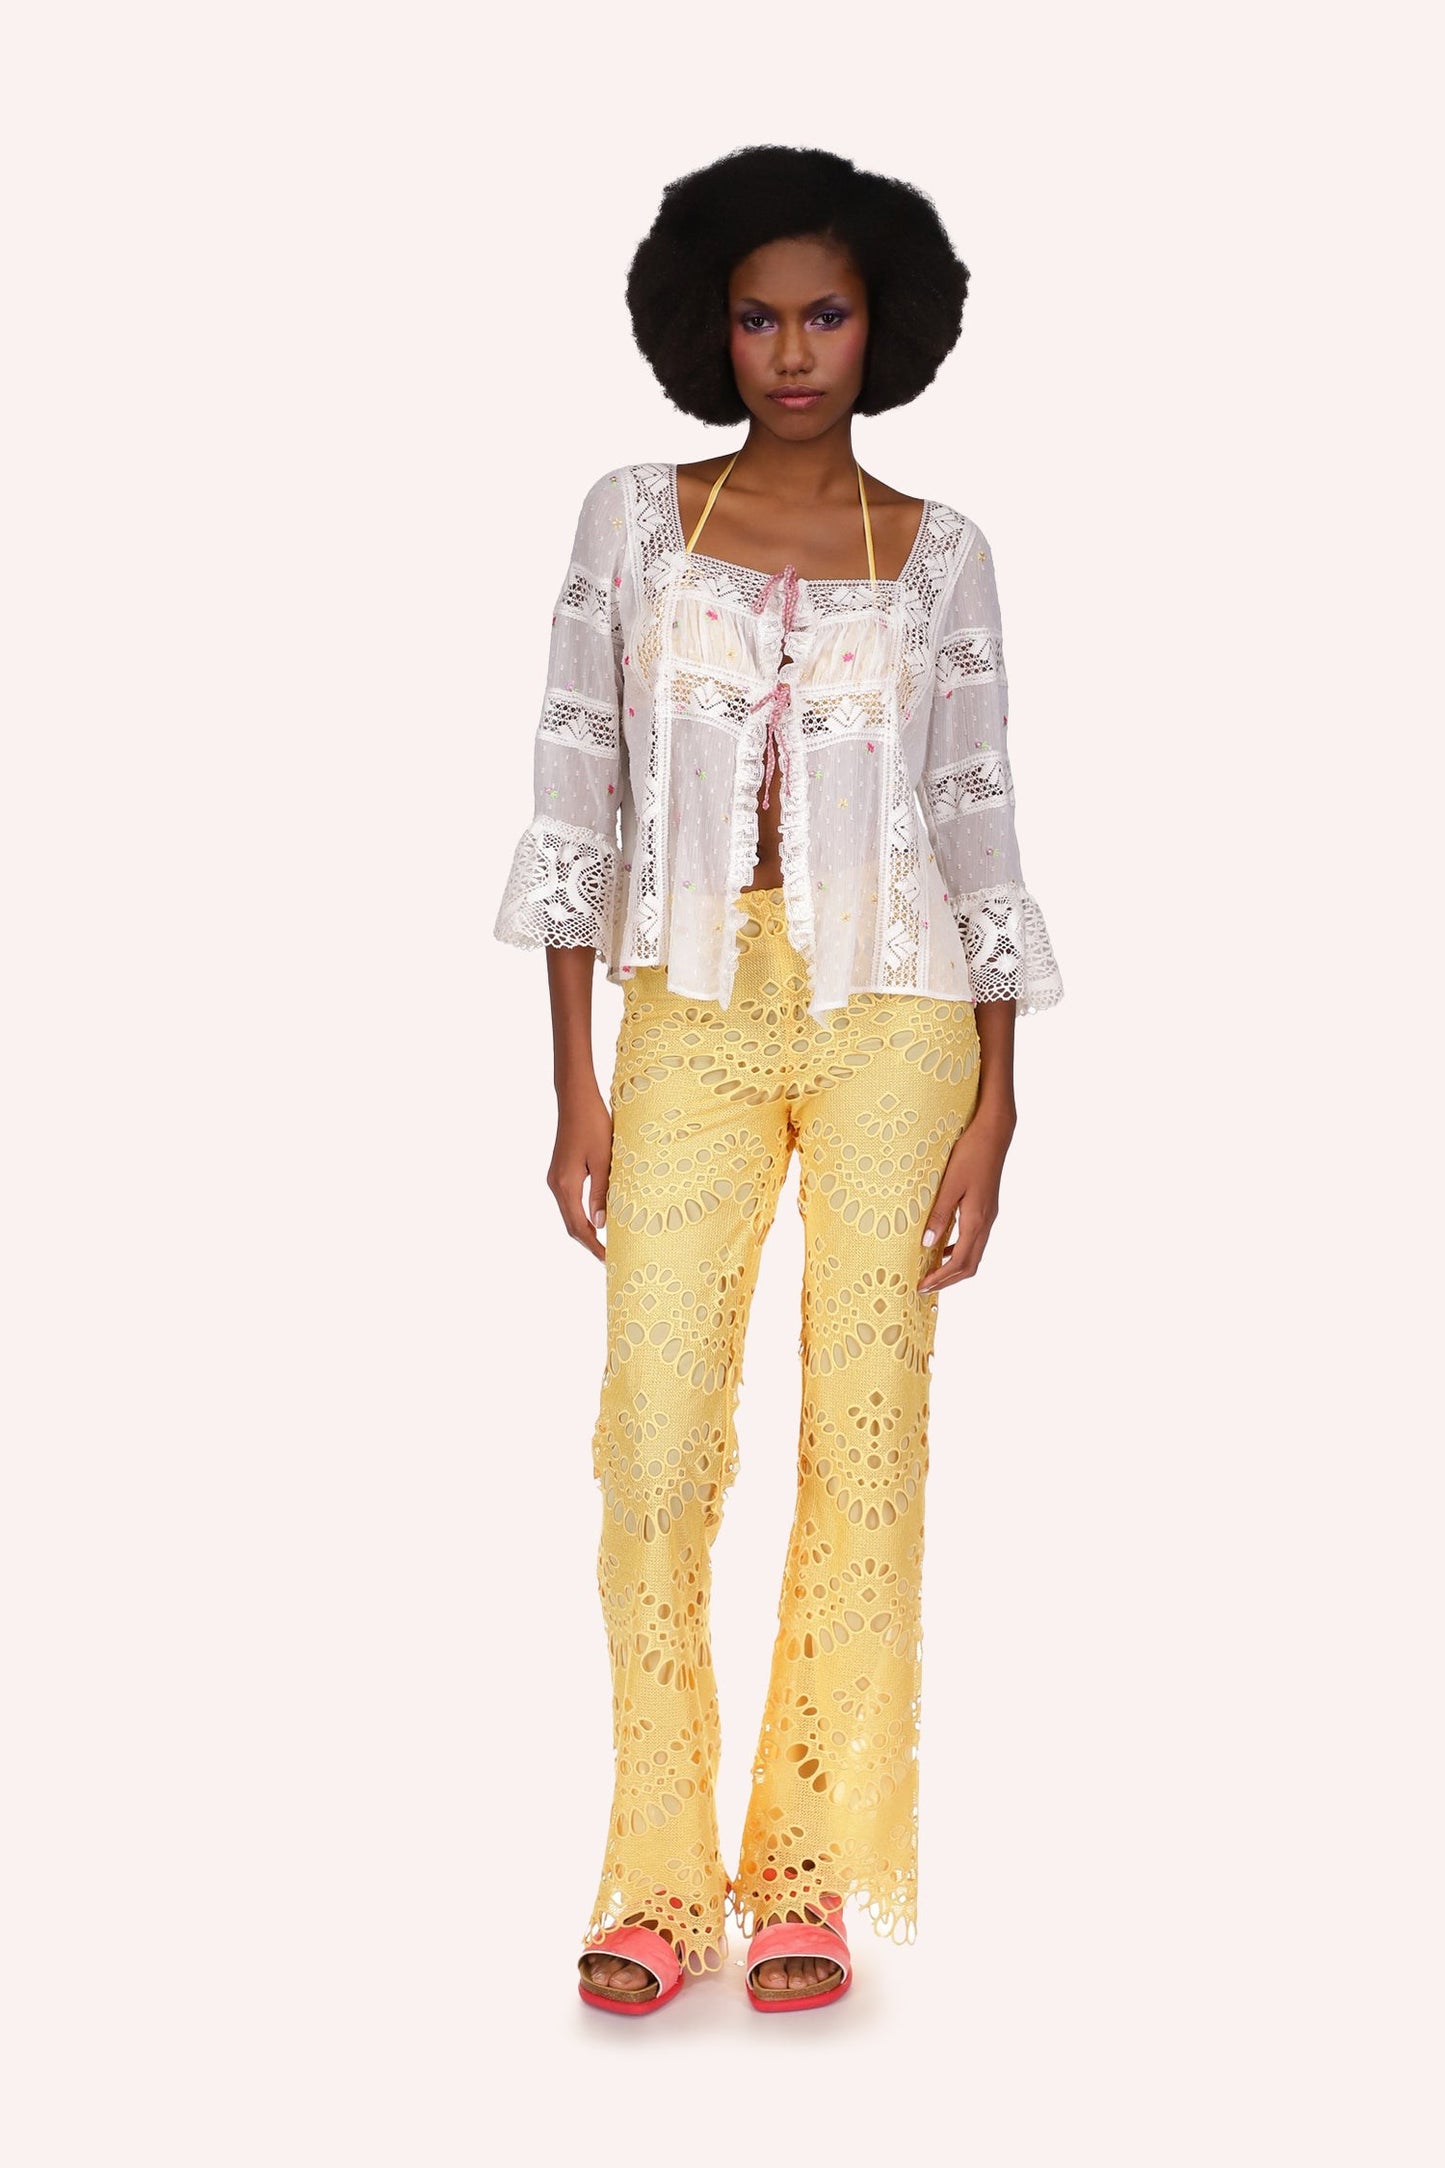 Cluny Lace Trimmed Floral Swiss Dot Blouse, square collar, mid-arm sleeves, see-thru, hips long.